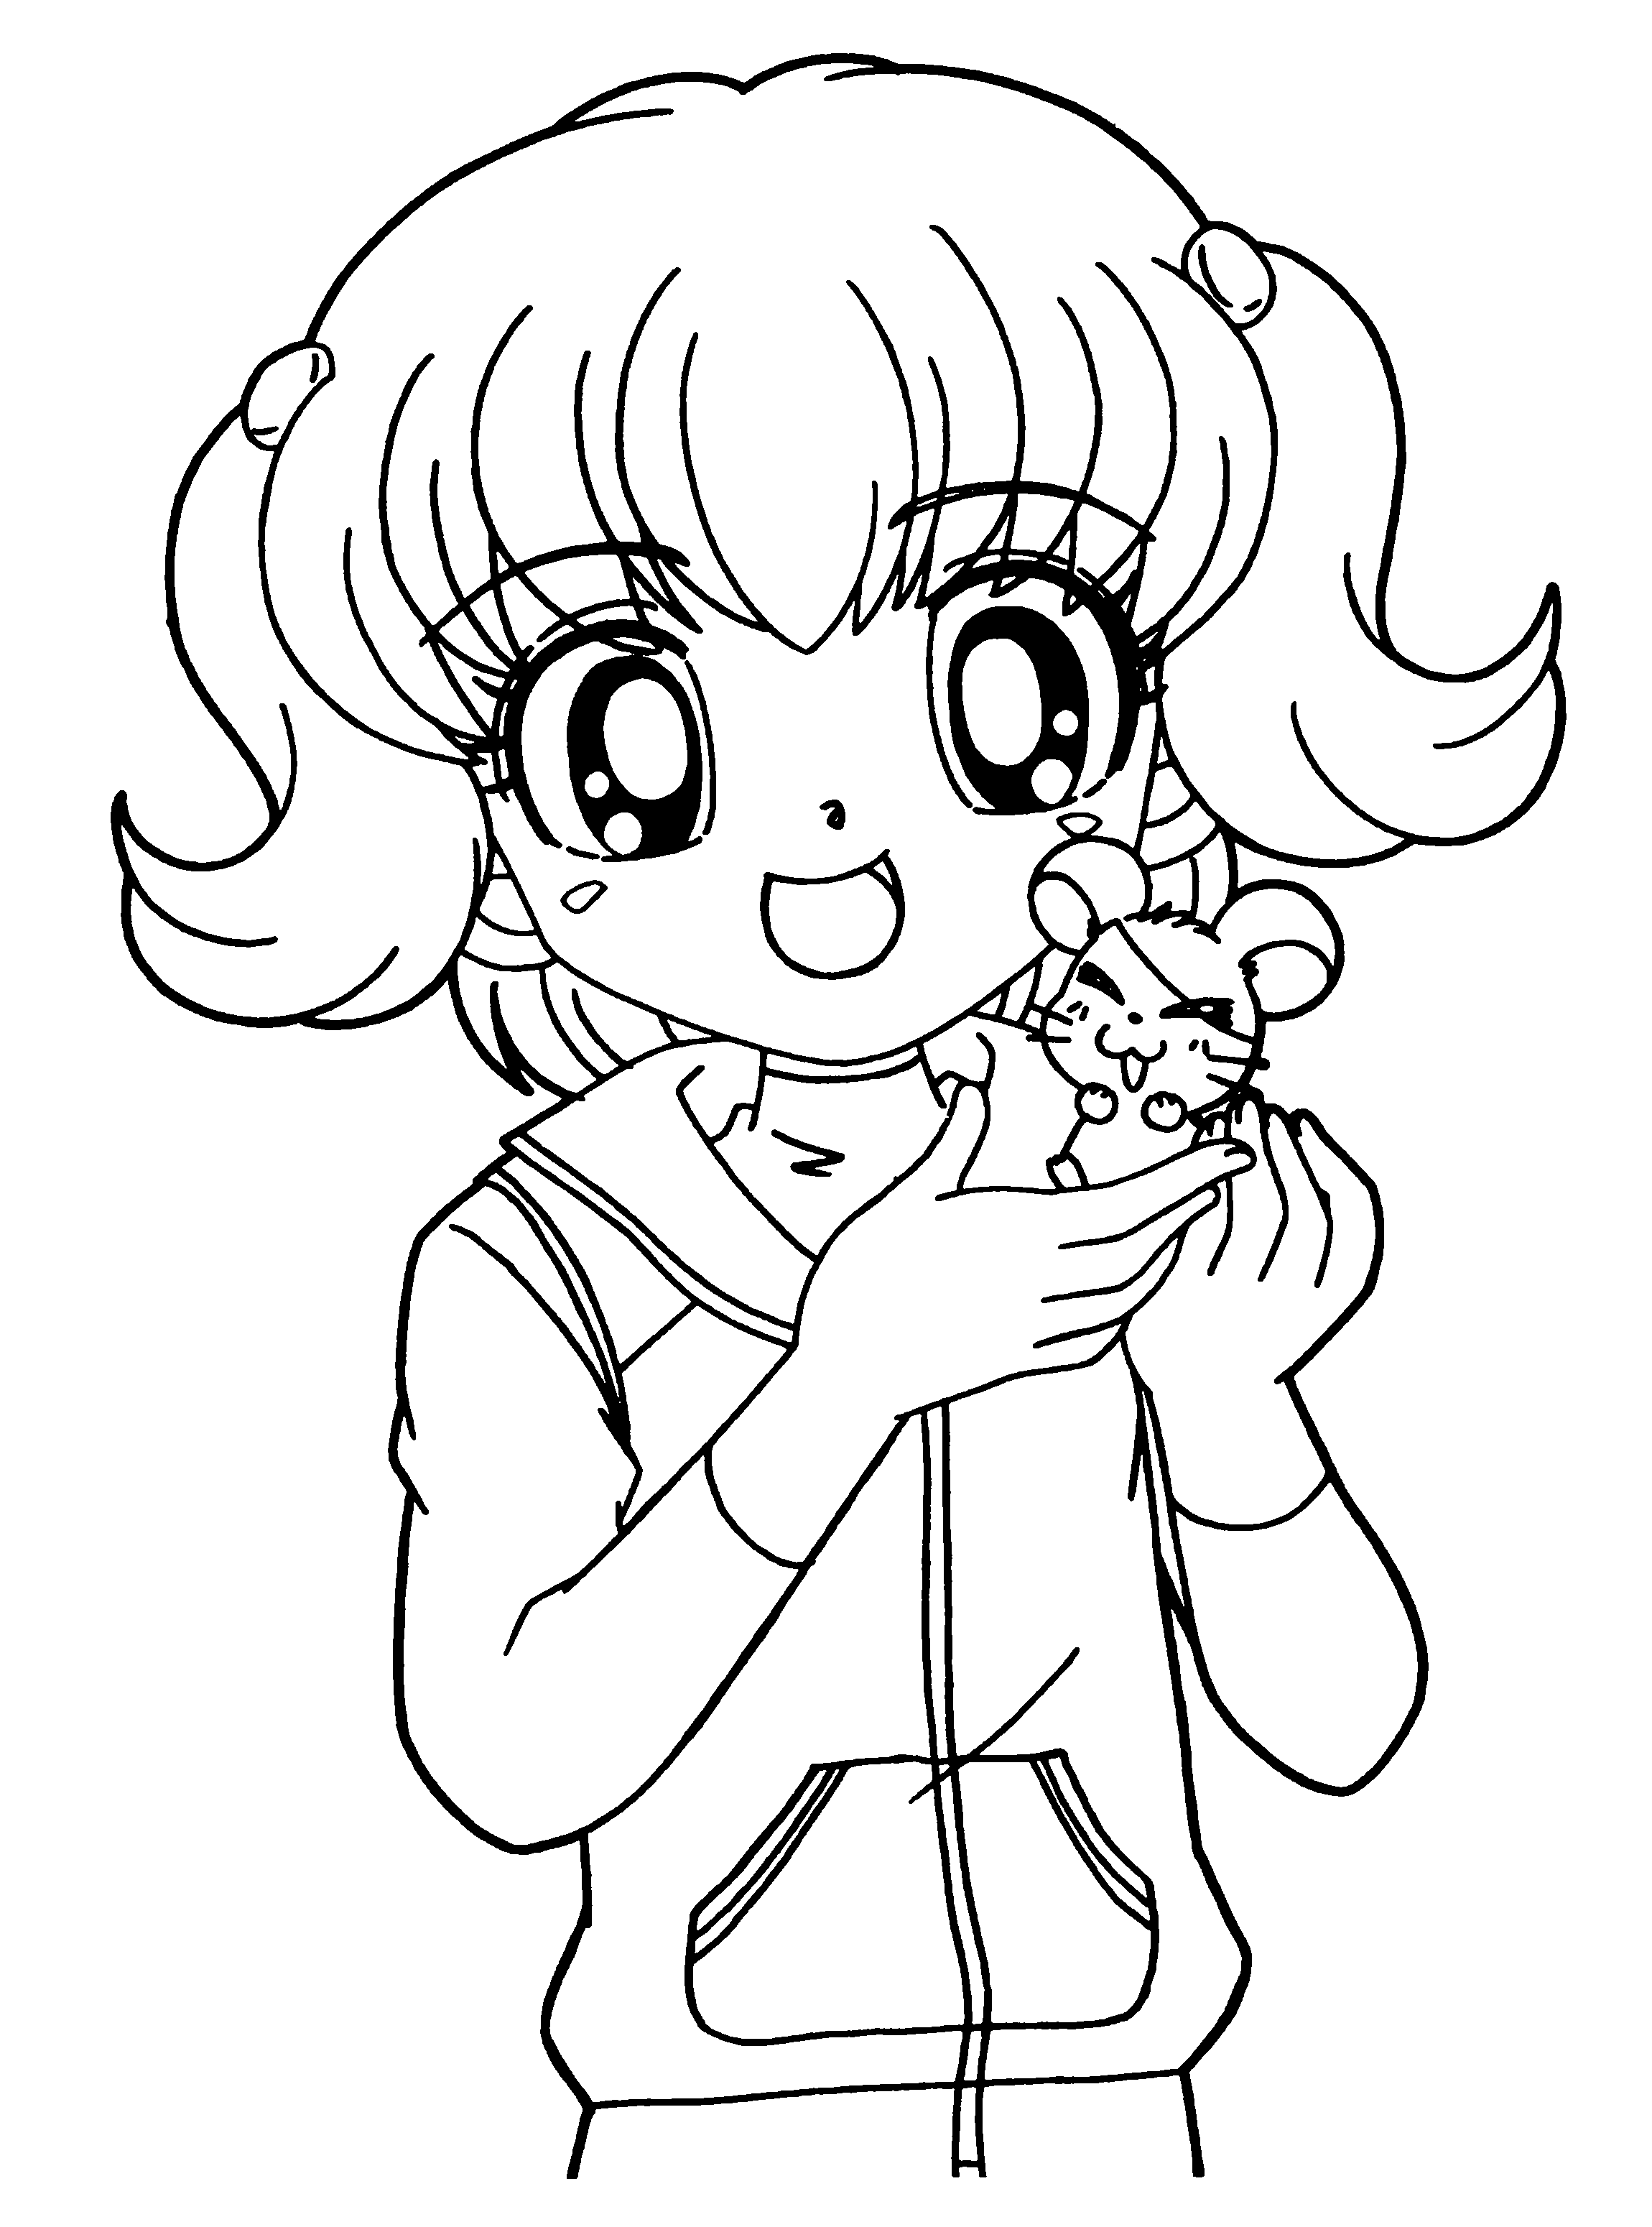 Printable Coloring Pages Anime - Customize and Print